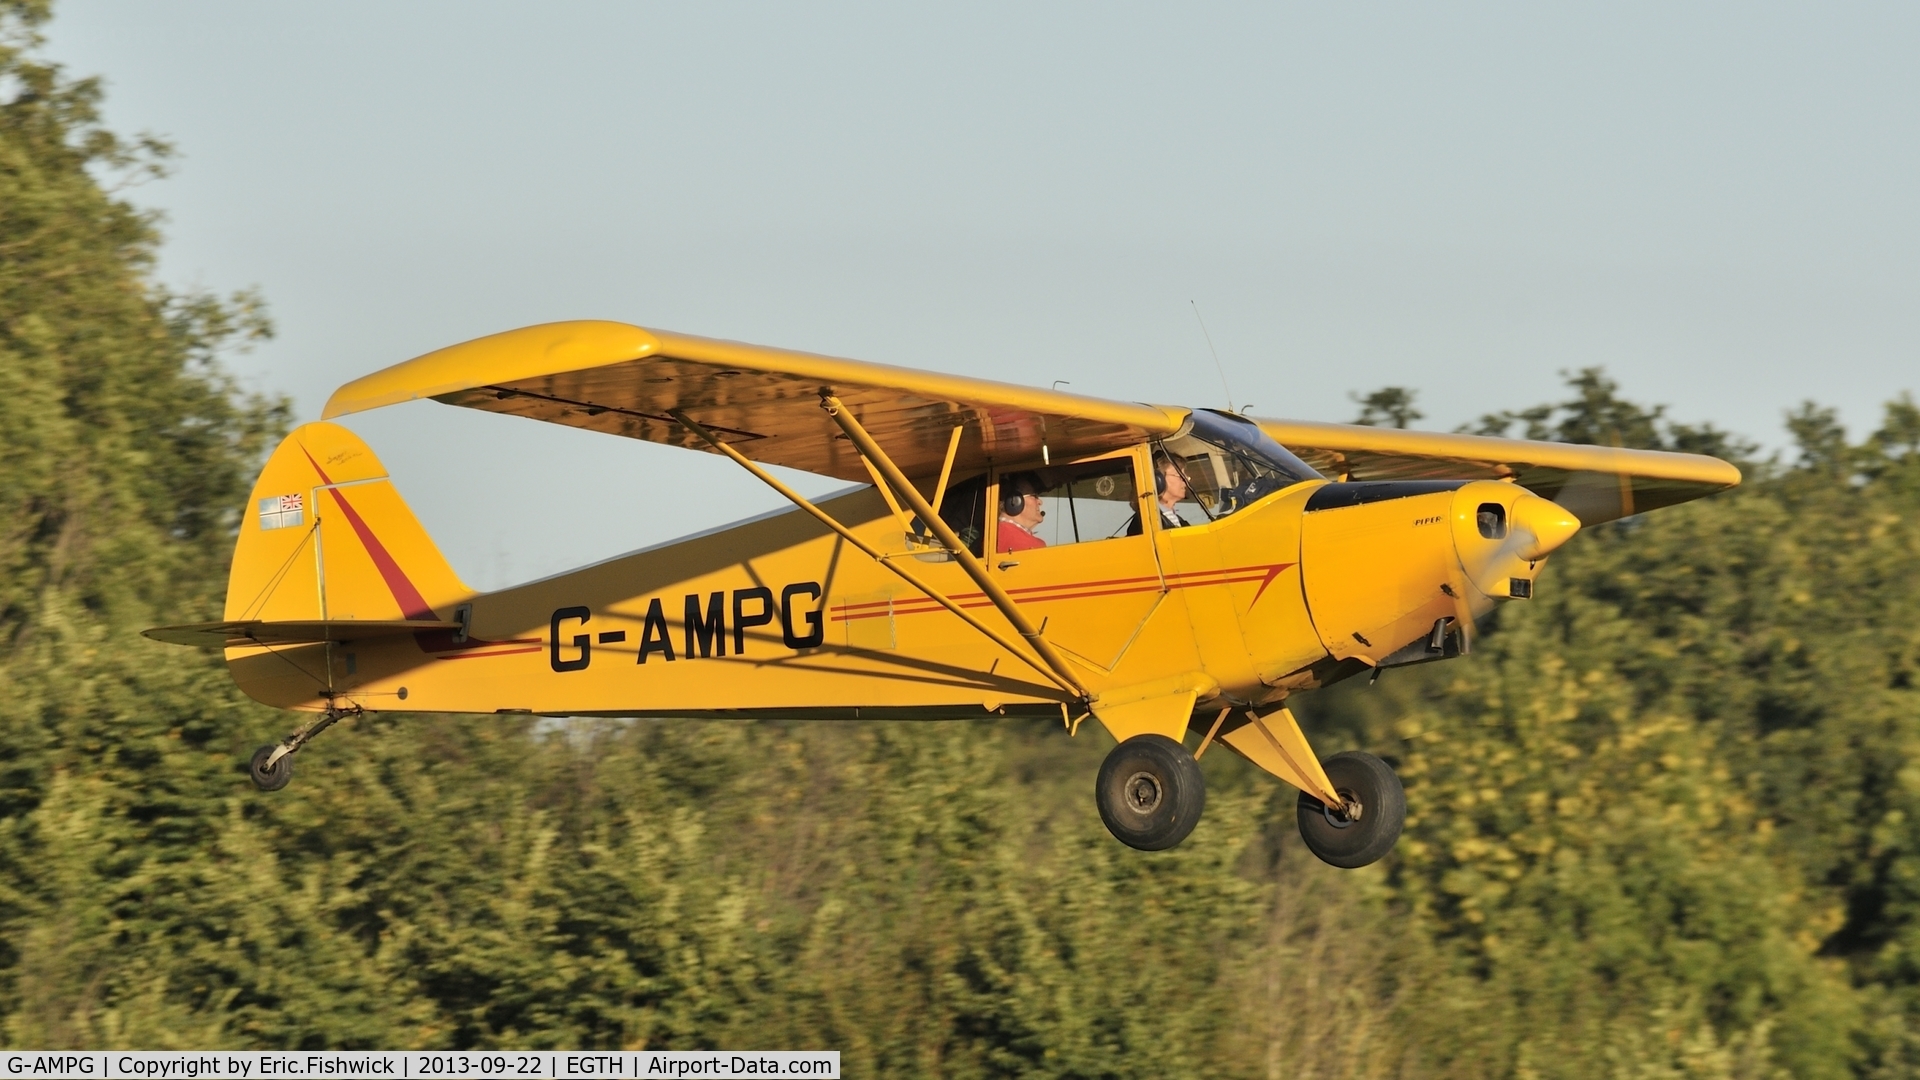 G-AMPG, 1946 Piper PA-12 Super Cruiser C/N 12-985, 43. G-AMPG departing the Shuttleworth Uncovered Air Display, Sept. 2013